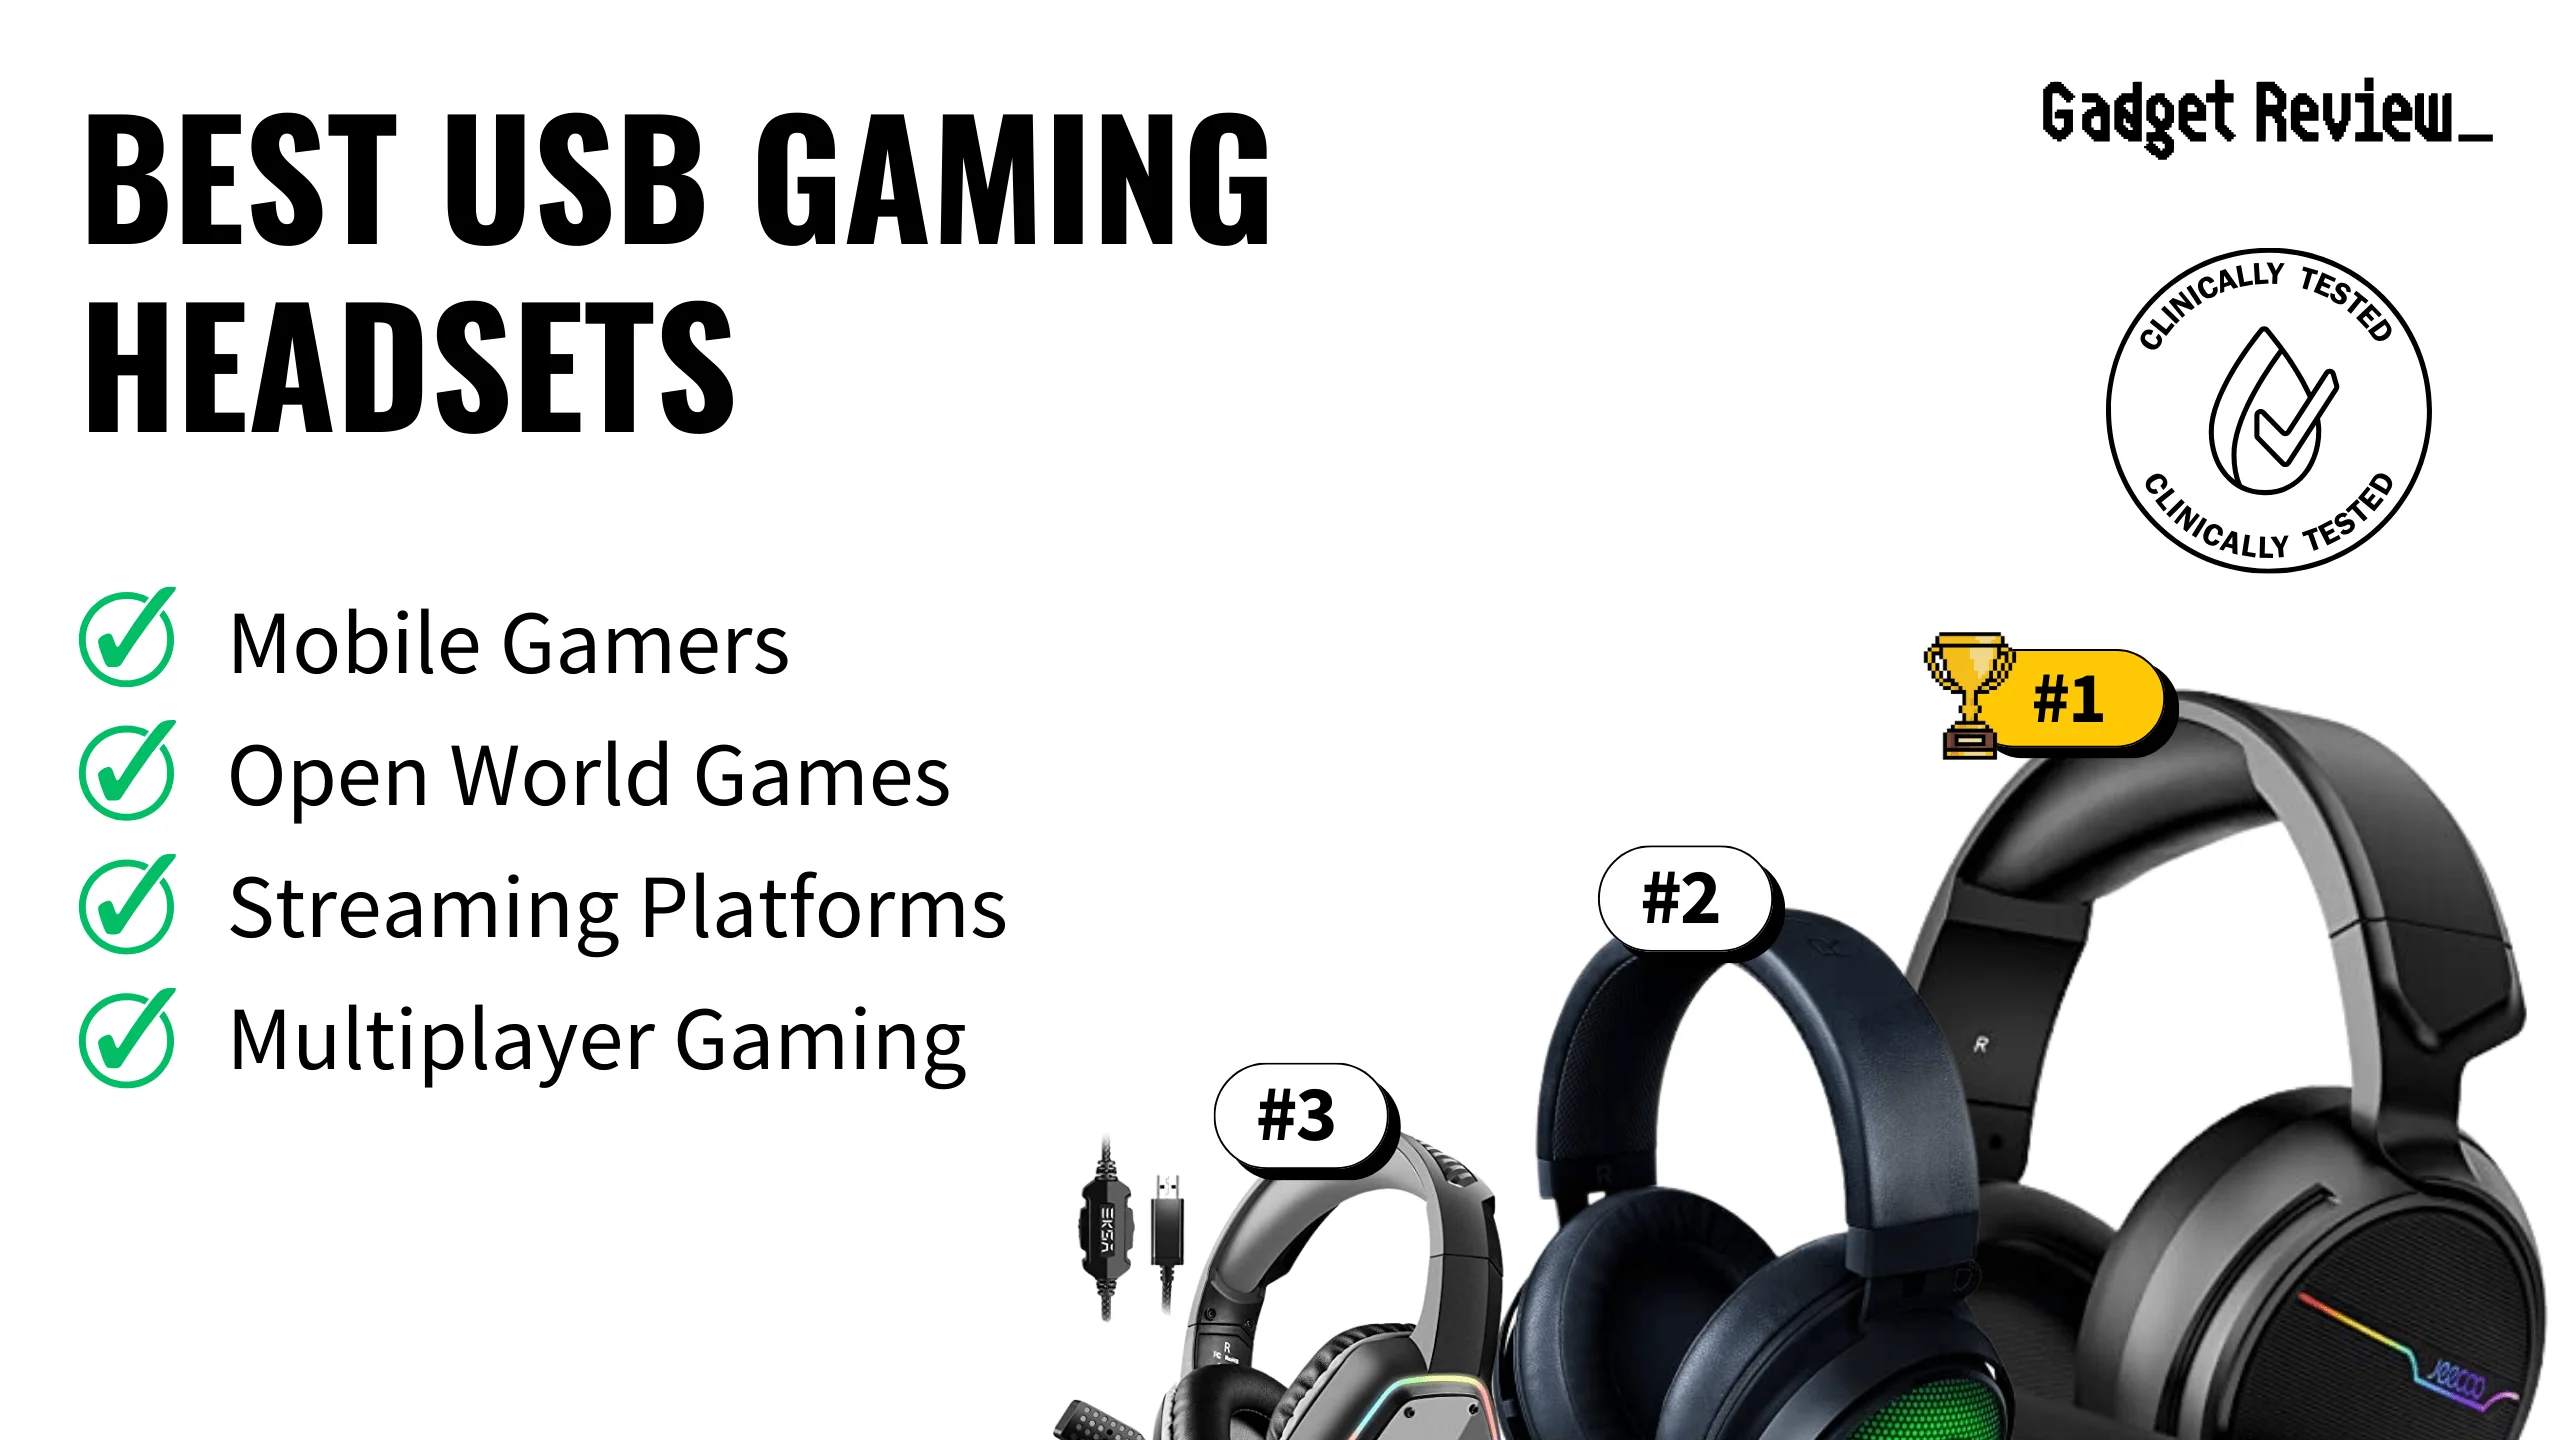 Best USB Gaming Headsets